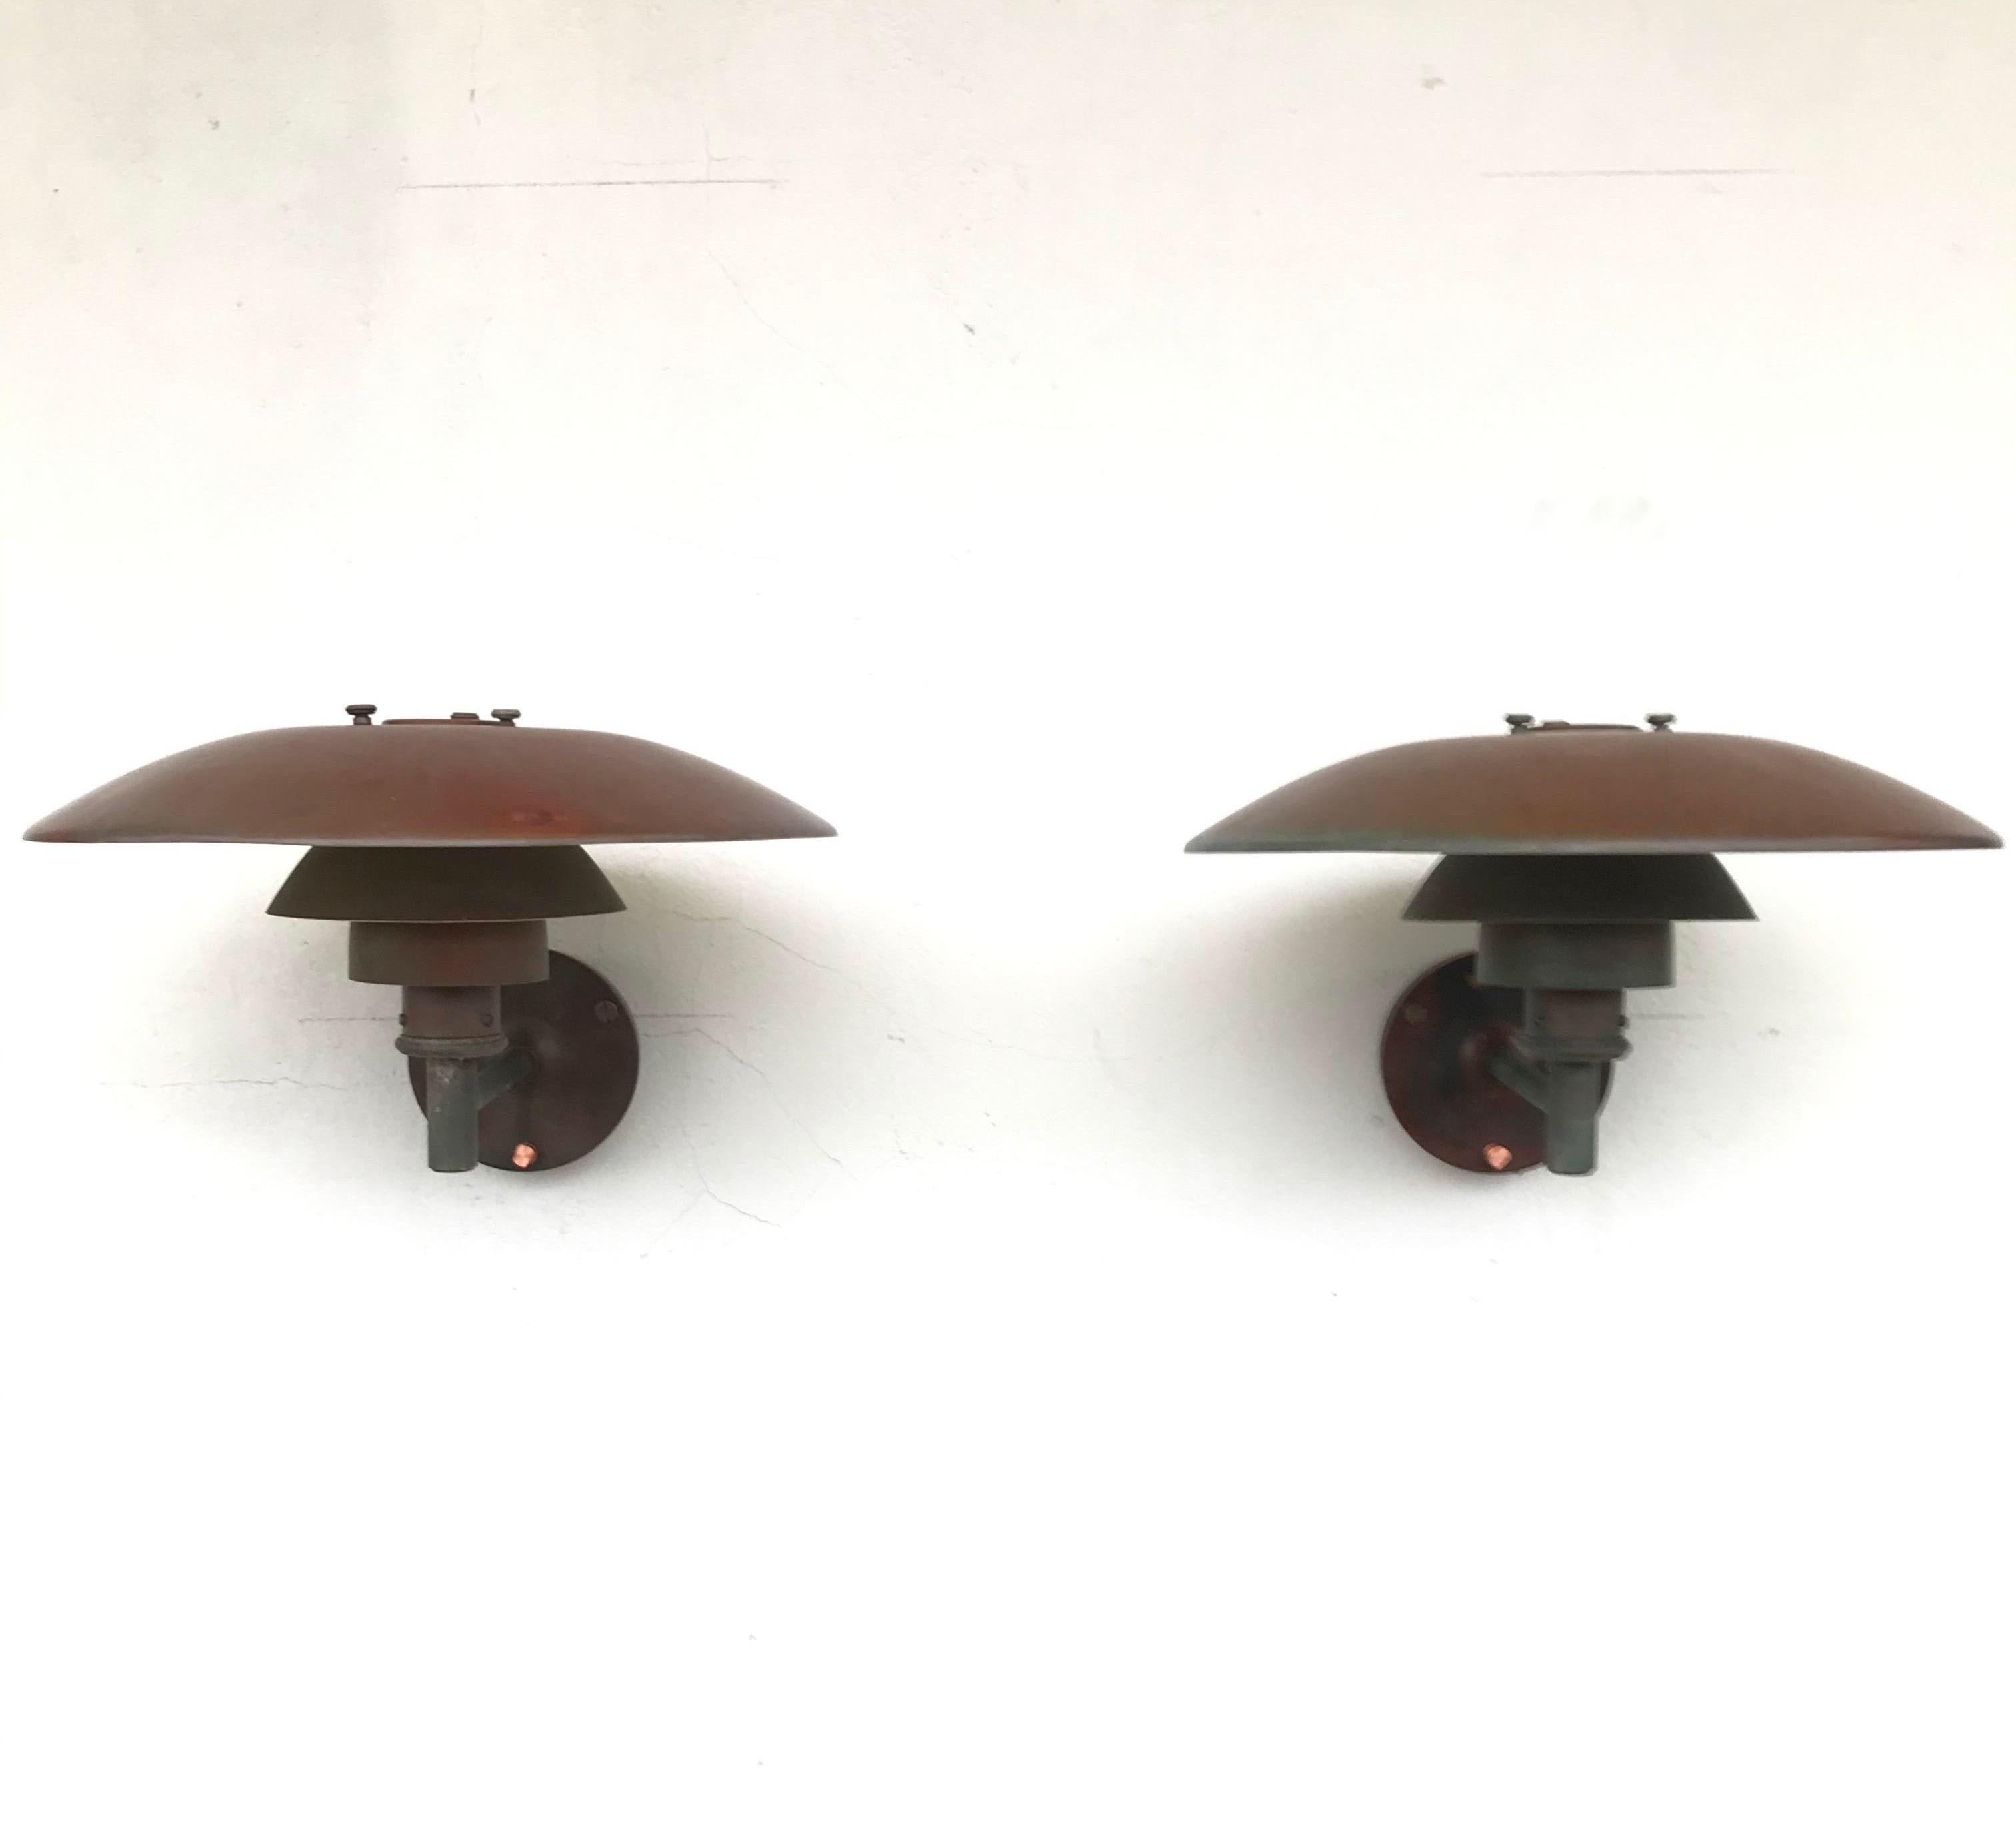 Poul Henningsen copper wall lamps PH 4.5 made in Denmark by Louis Poulsen from the 1980s
This iconic lamp was first designed in 1966 and has been a Classic ever since
This pair of lamps are in original condition with lovely Verdigris, patina and